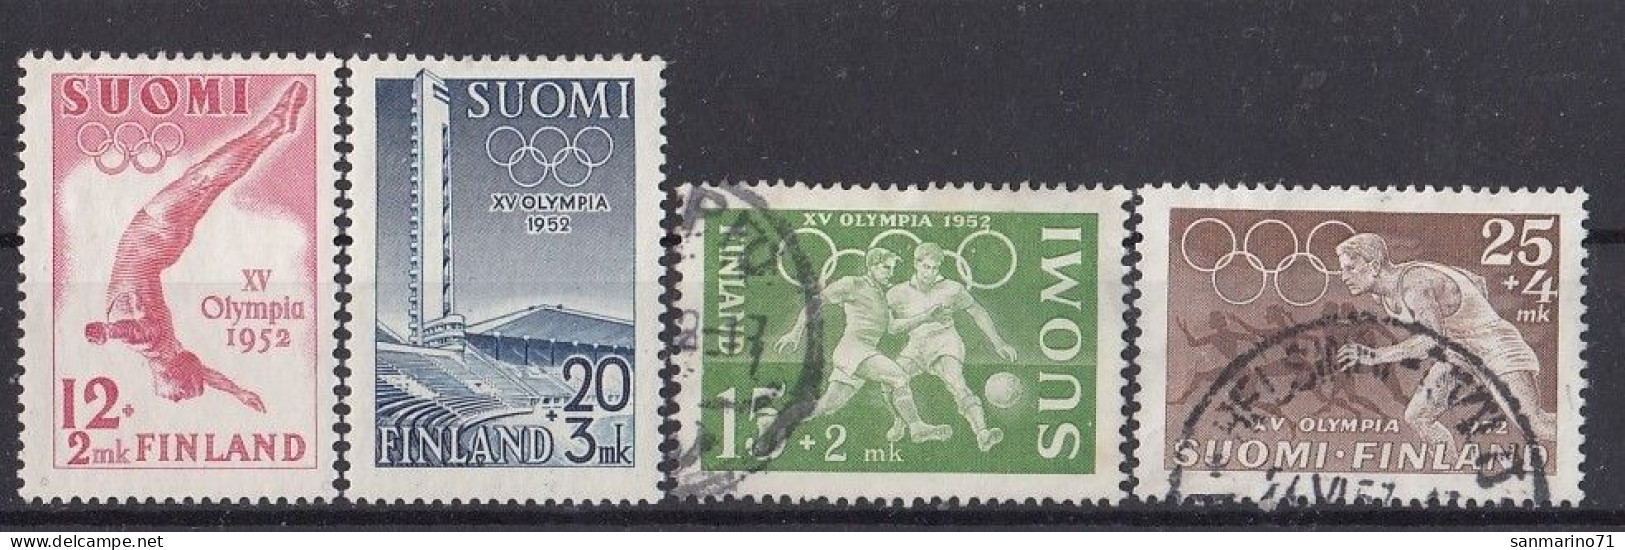 FINLAND 399-402,used,falc Hinged - Used Stamps